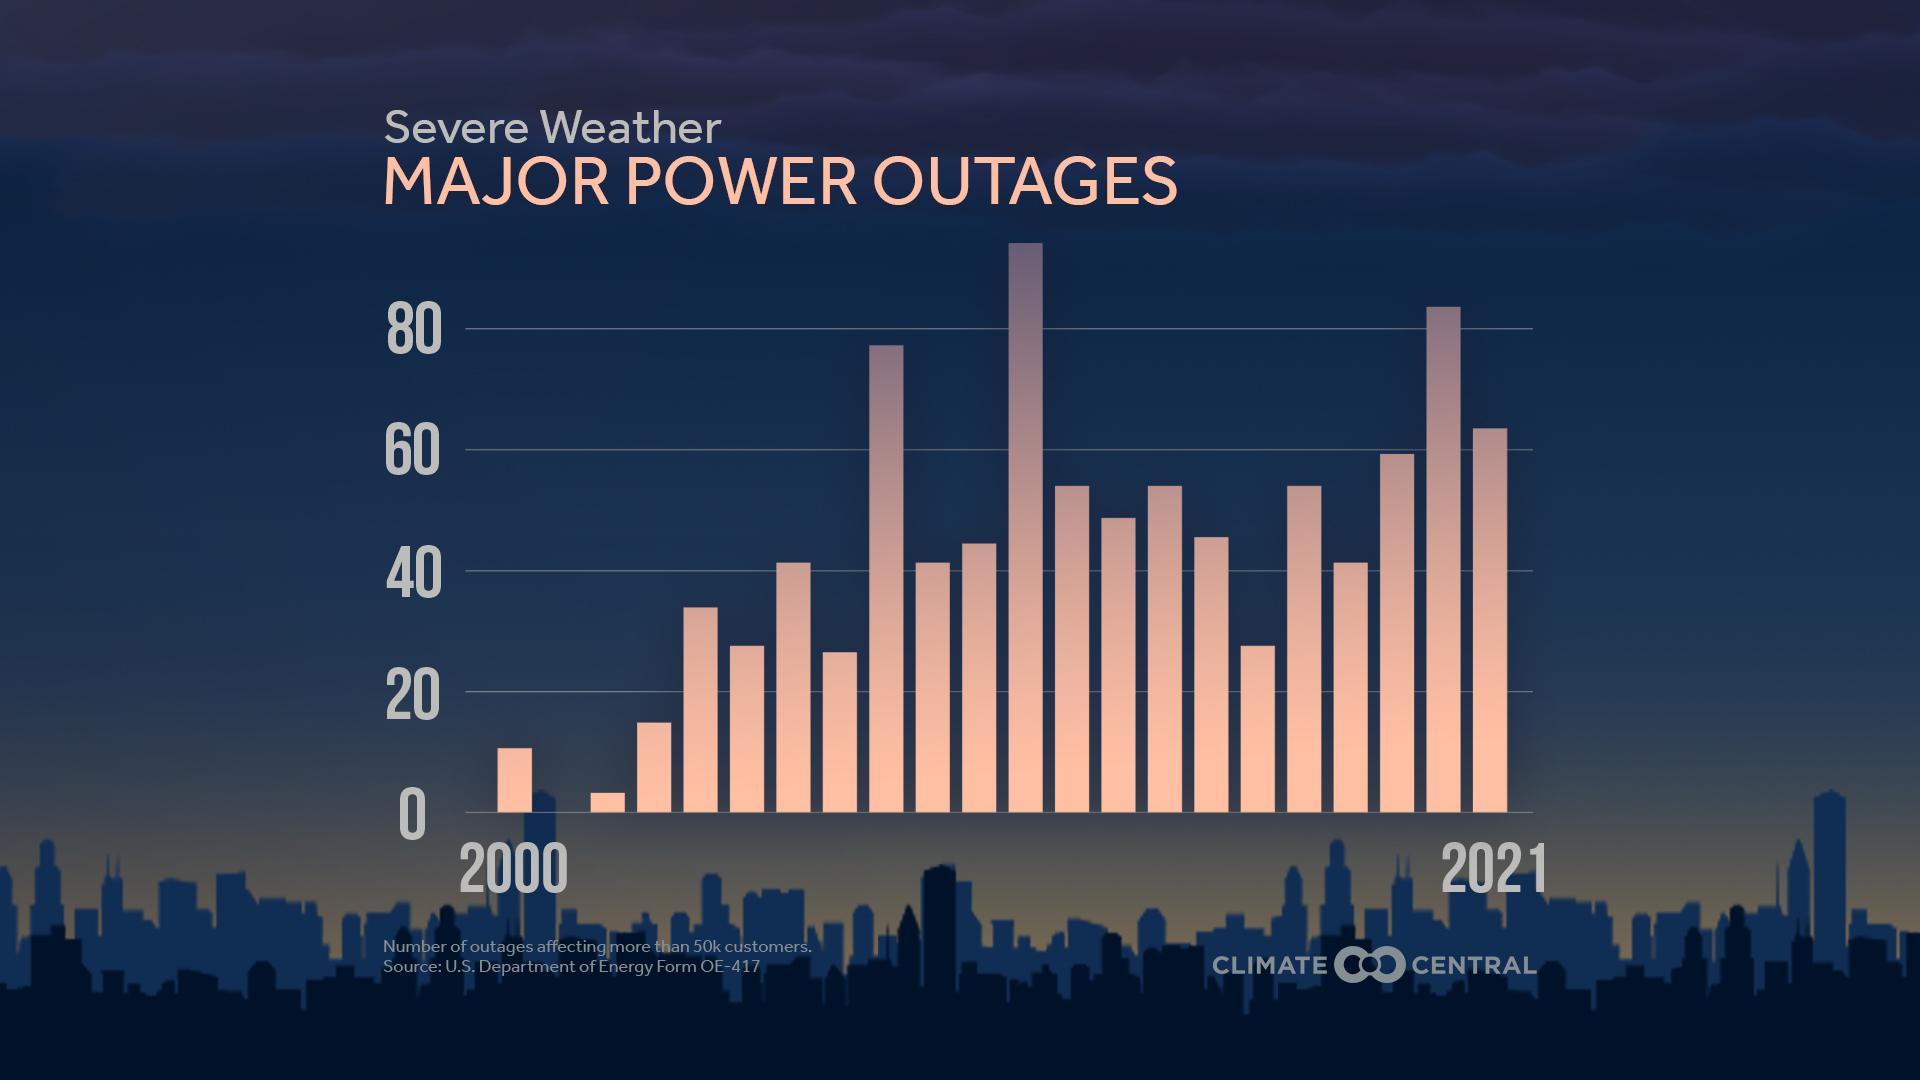 CM: Outages by Weather Type - Severe Weather